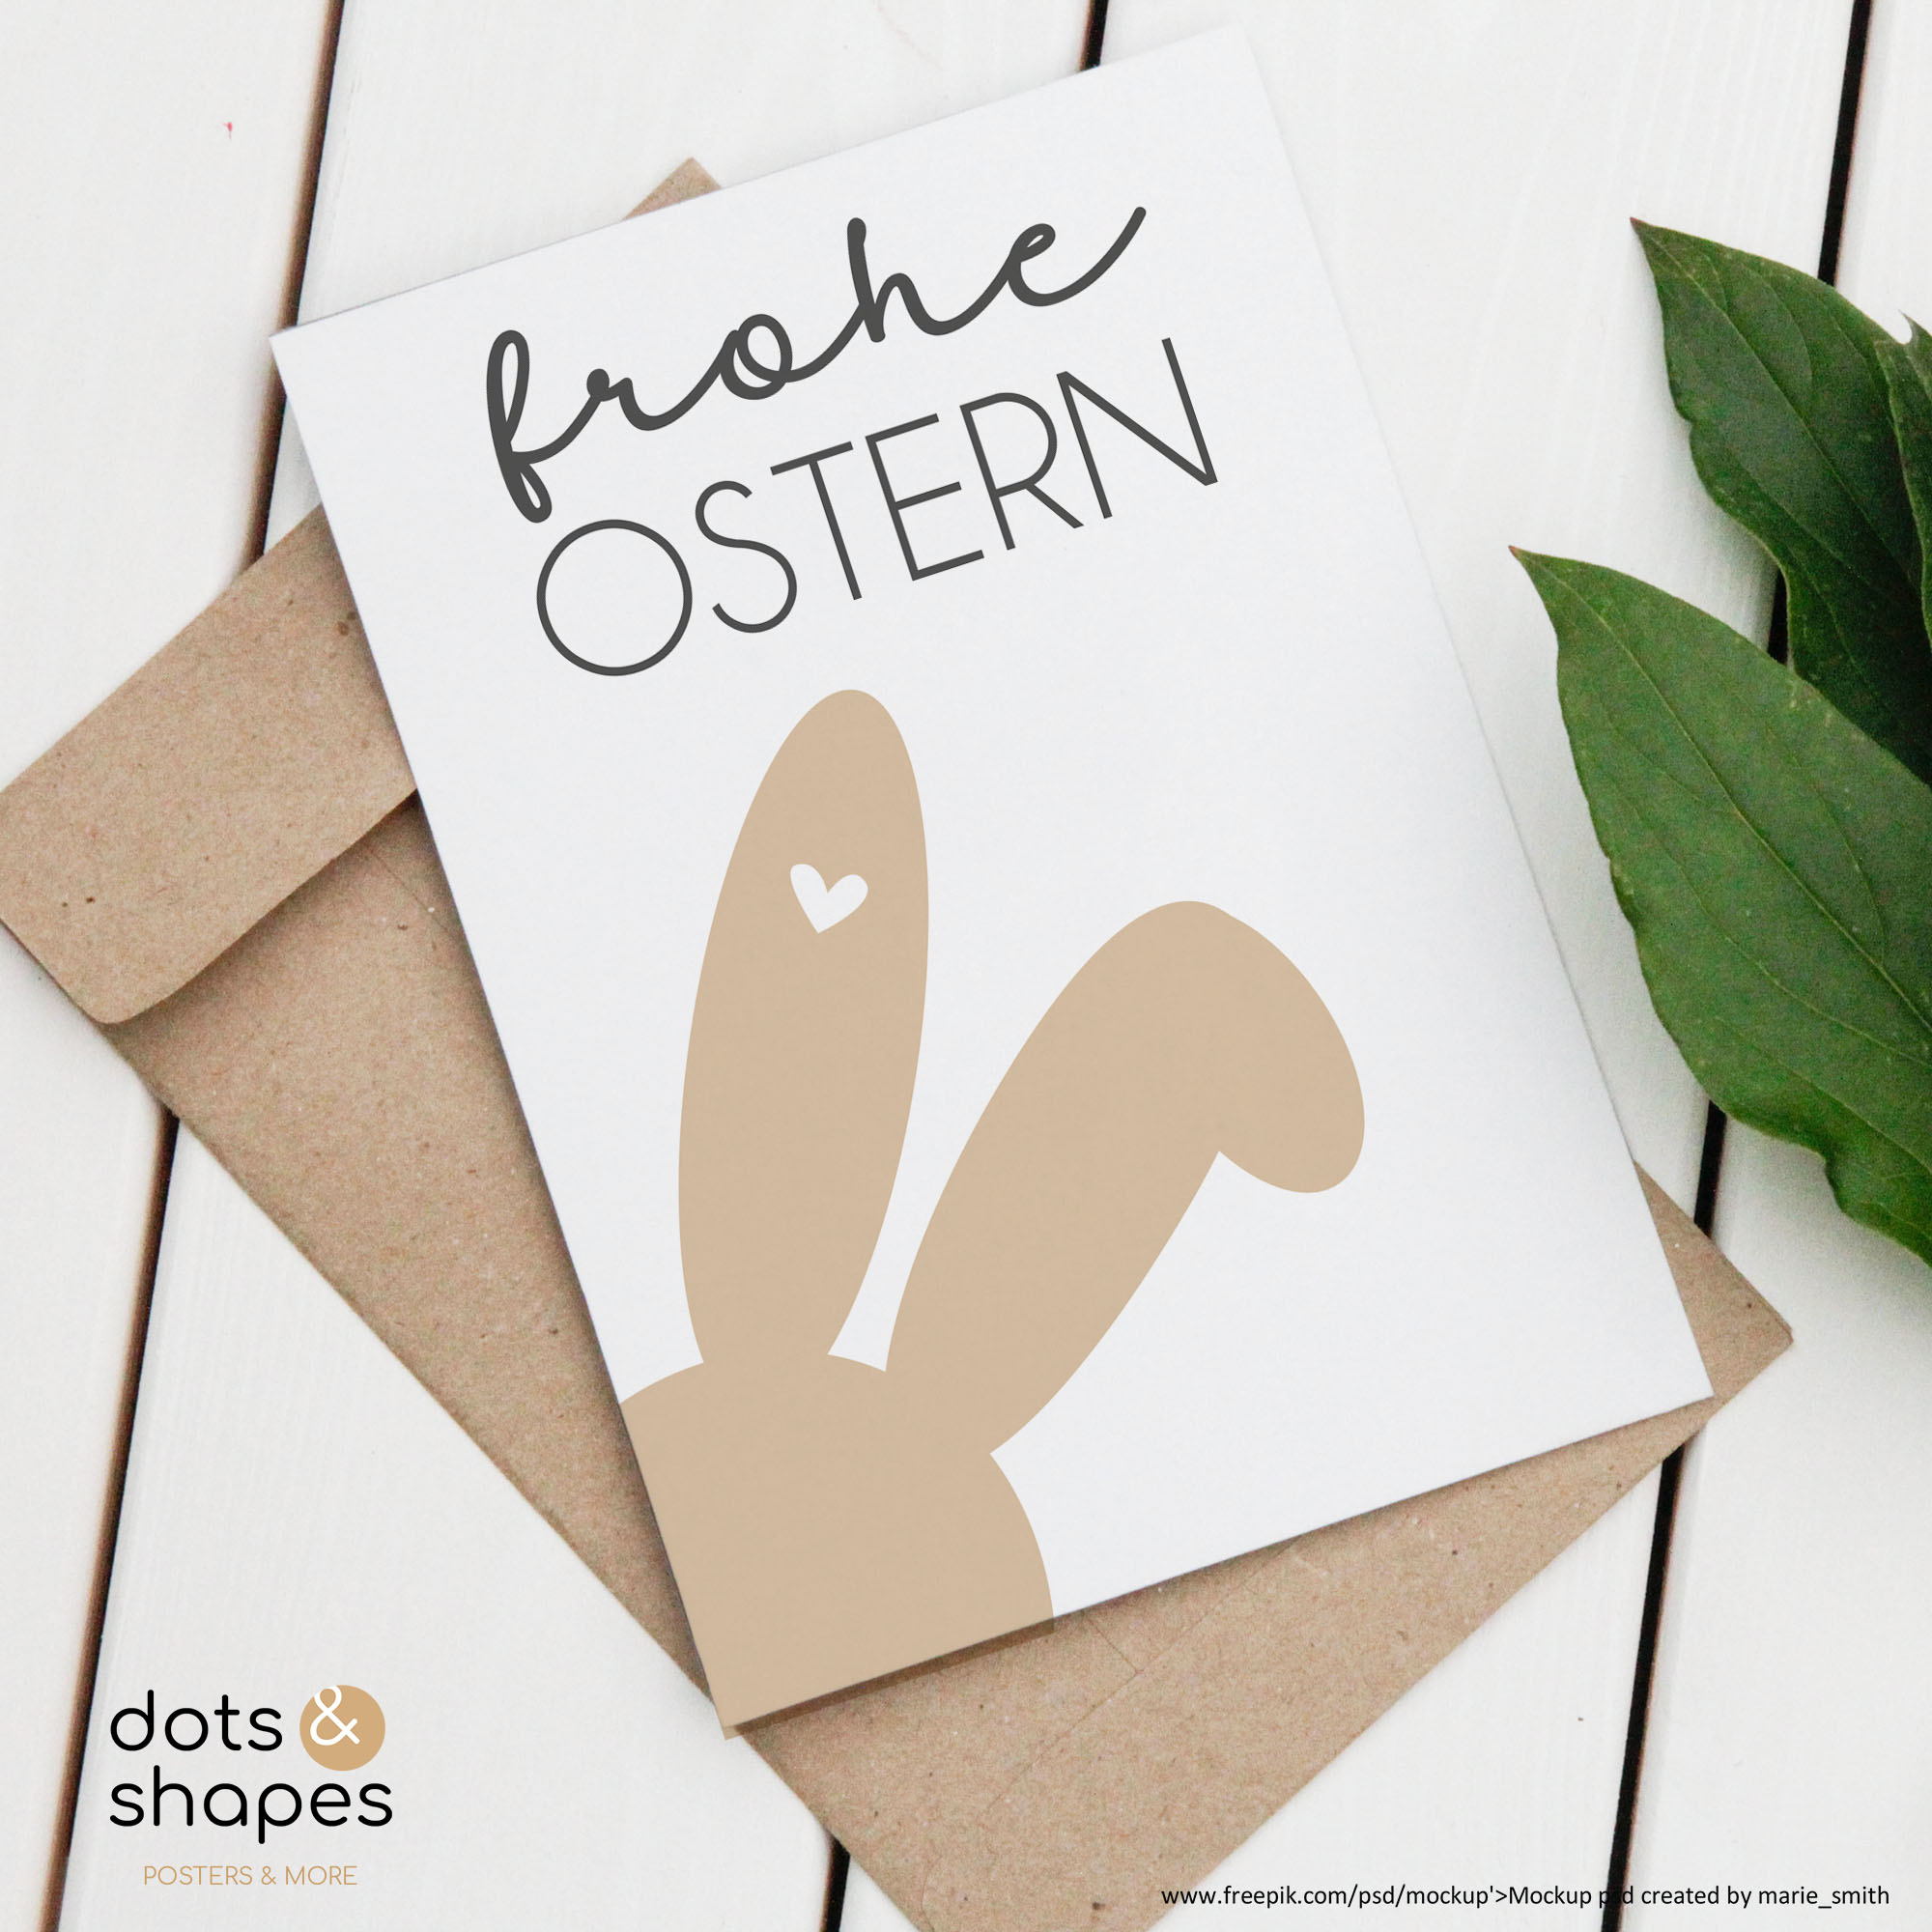 Frohe Ostern Hase Karte